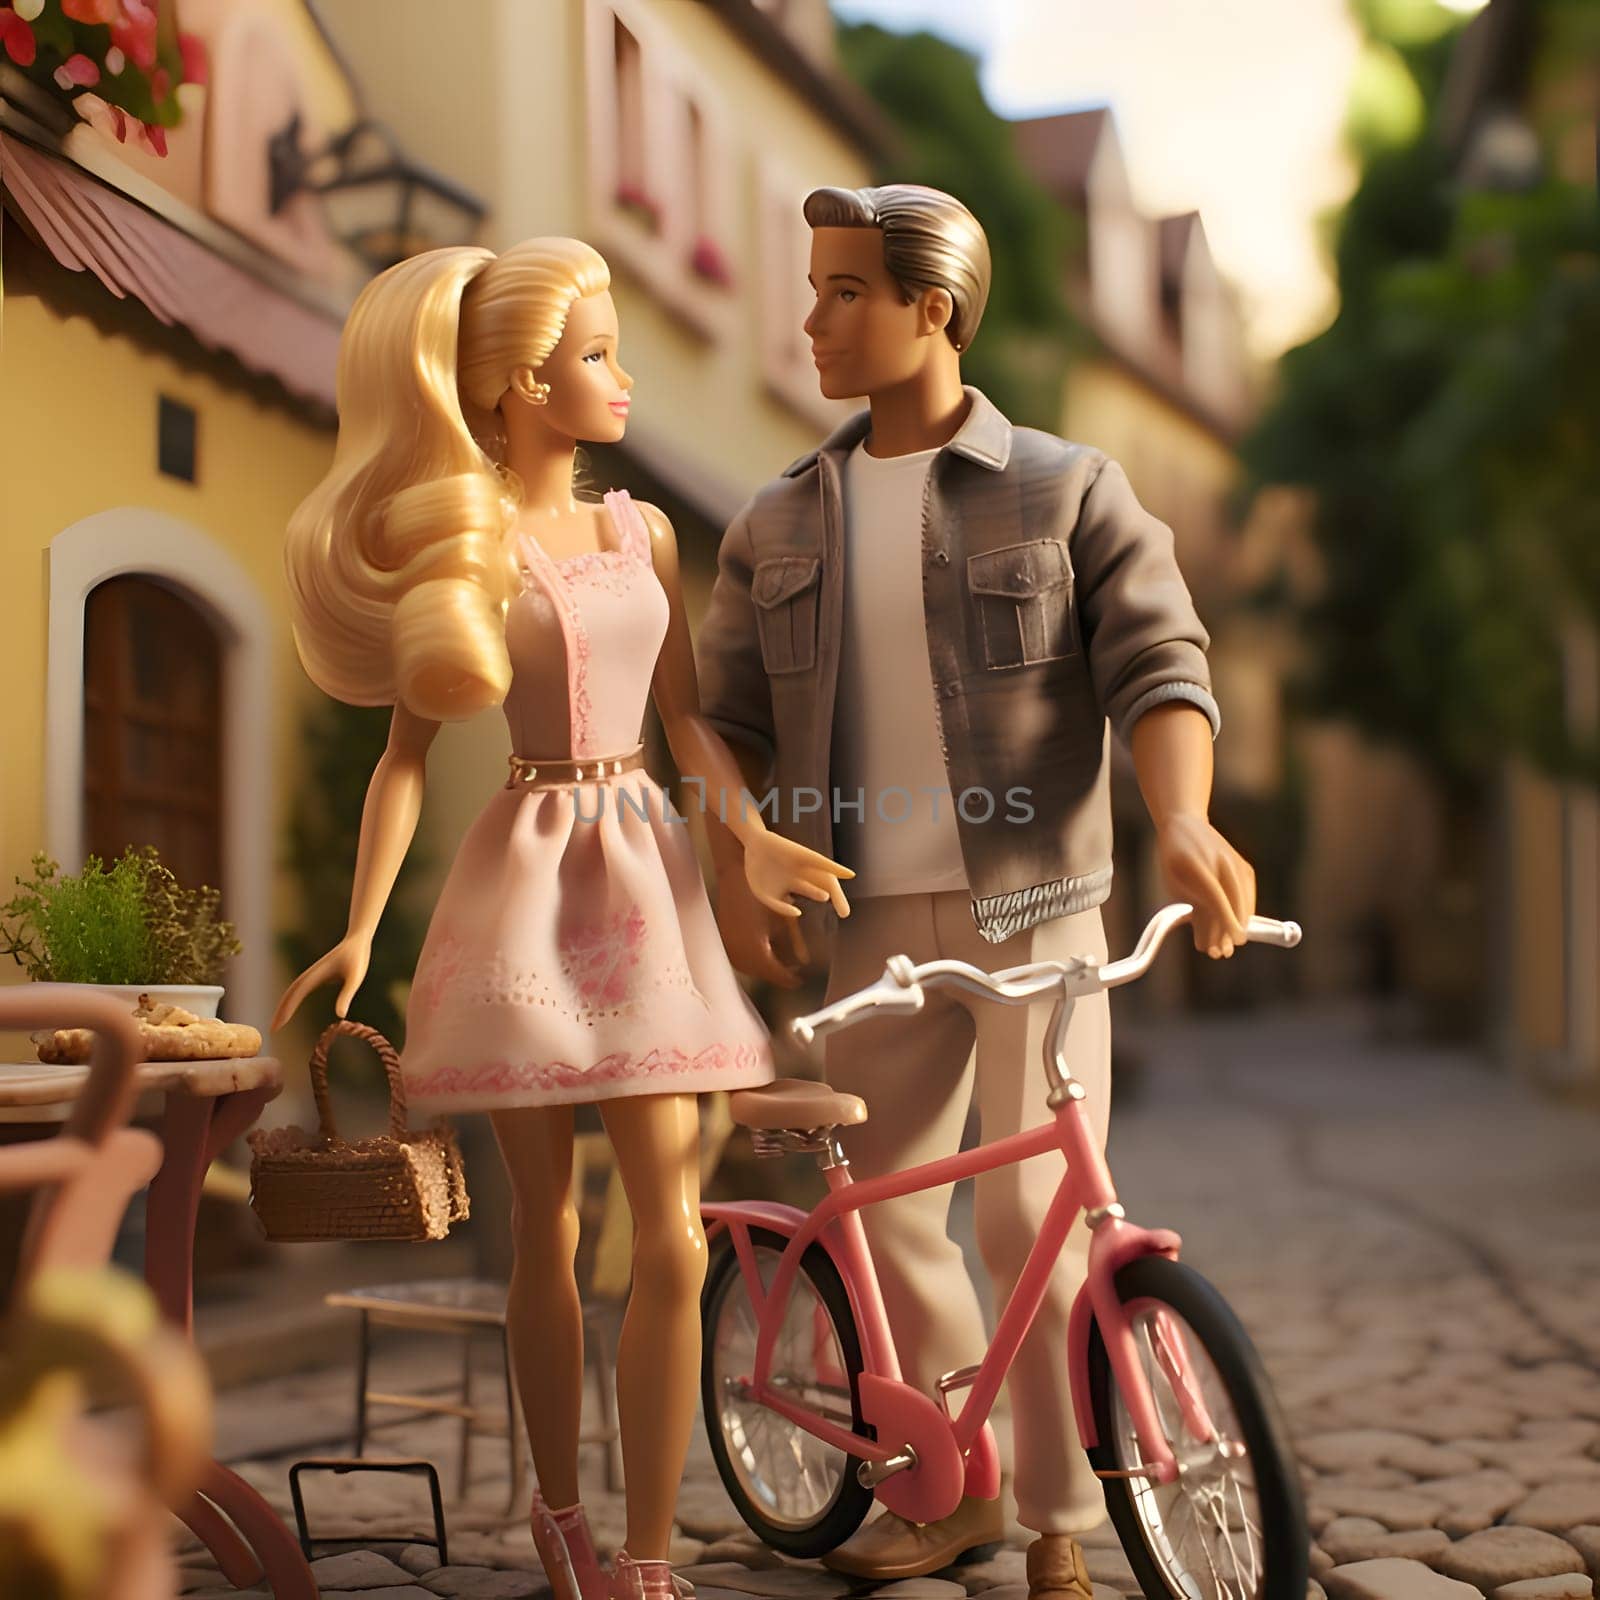 Barbie and Ken go on a delightful bike trip, exploring the scenic beauty around them.